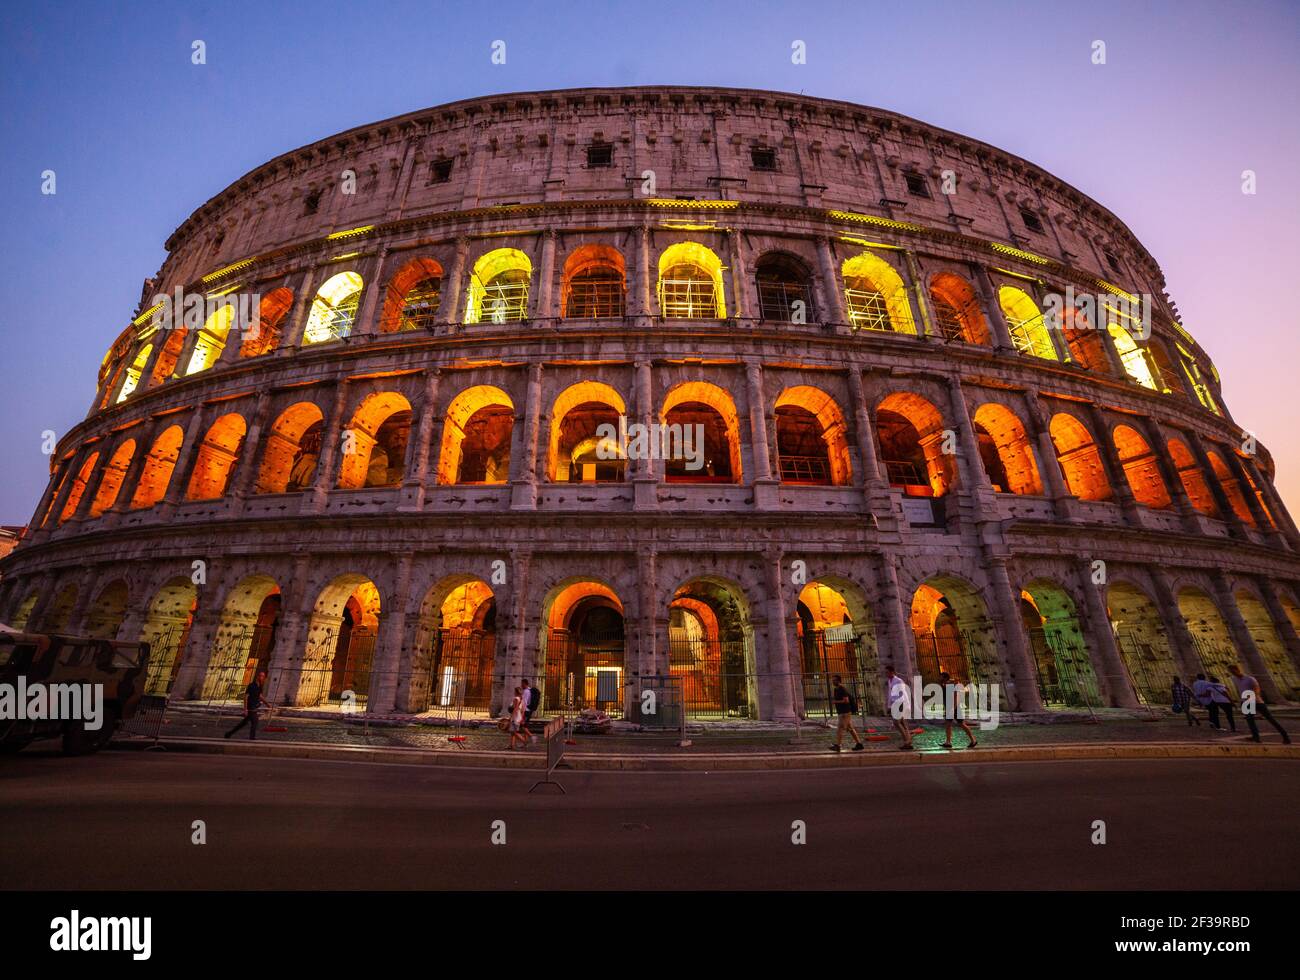 Low angle view of tourists walking on street outside Colosseum at dusk, Rome Stock Photo